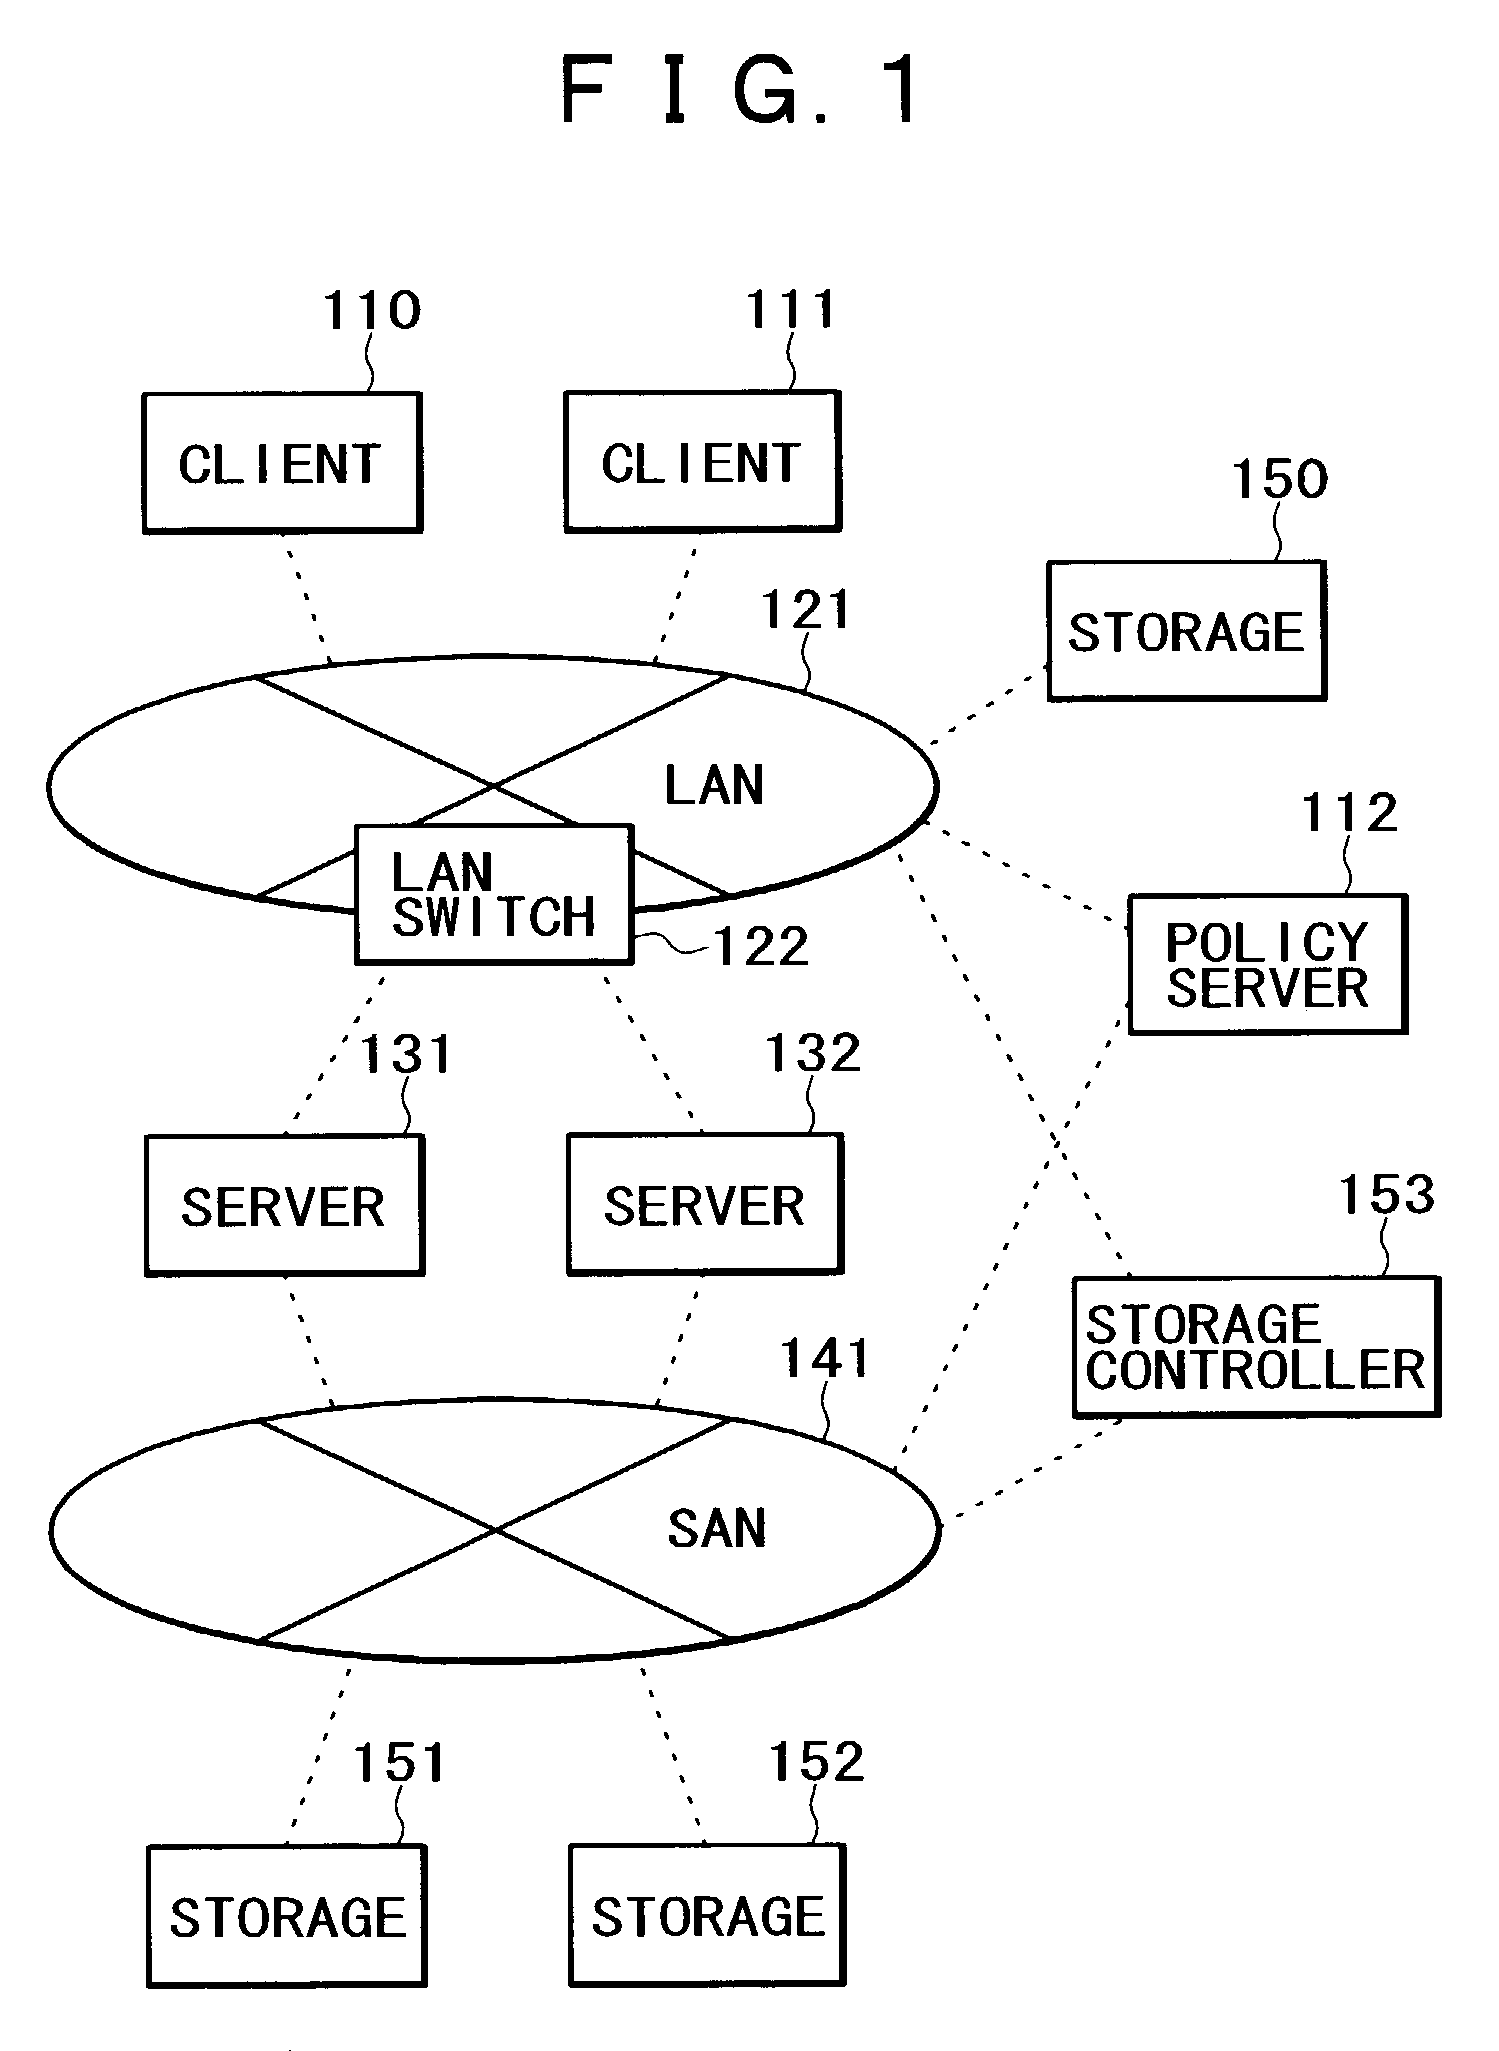 Network, server, and storage policy server